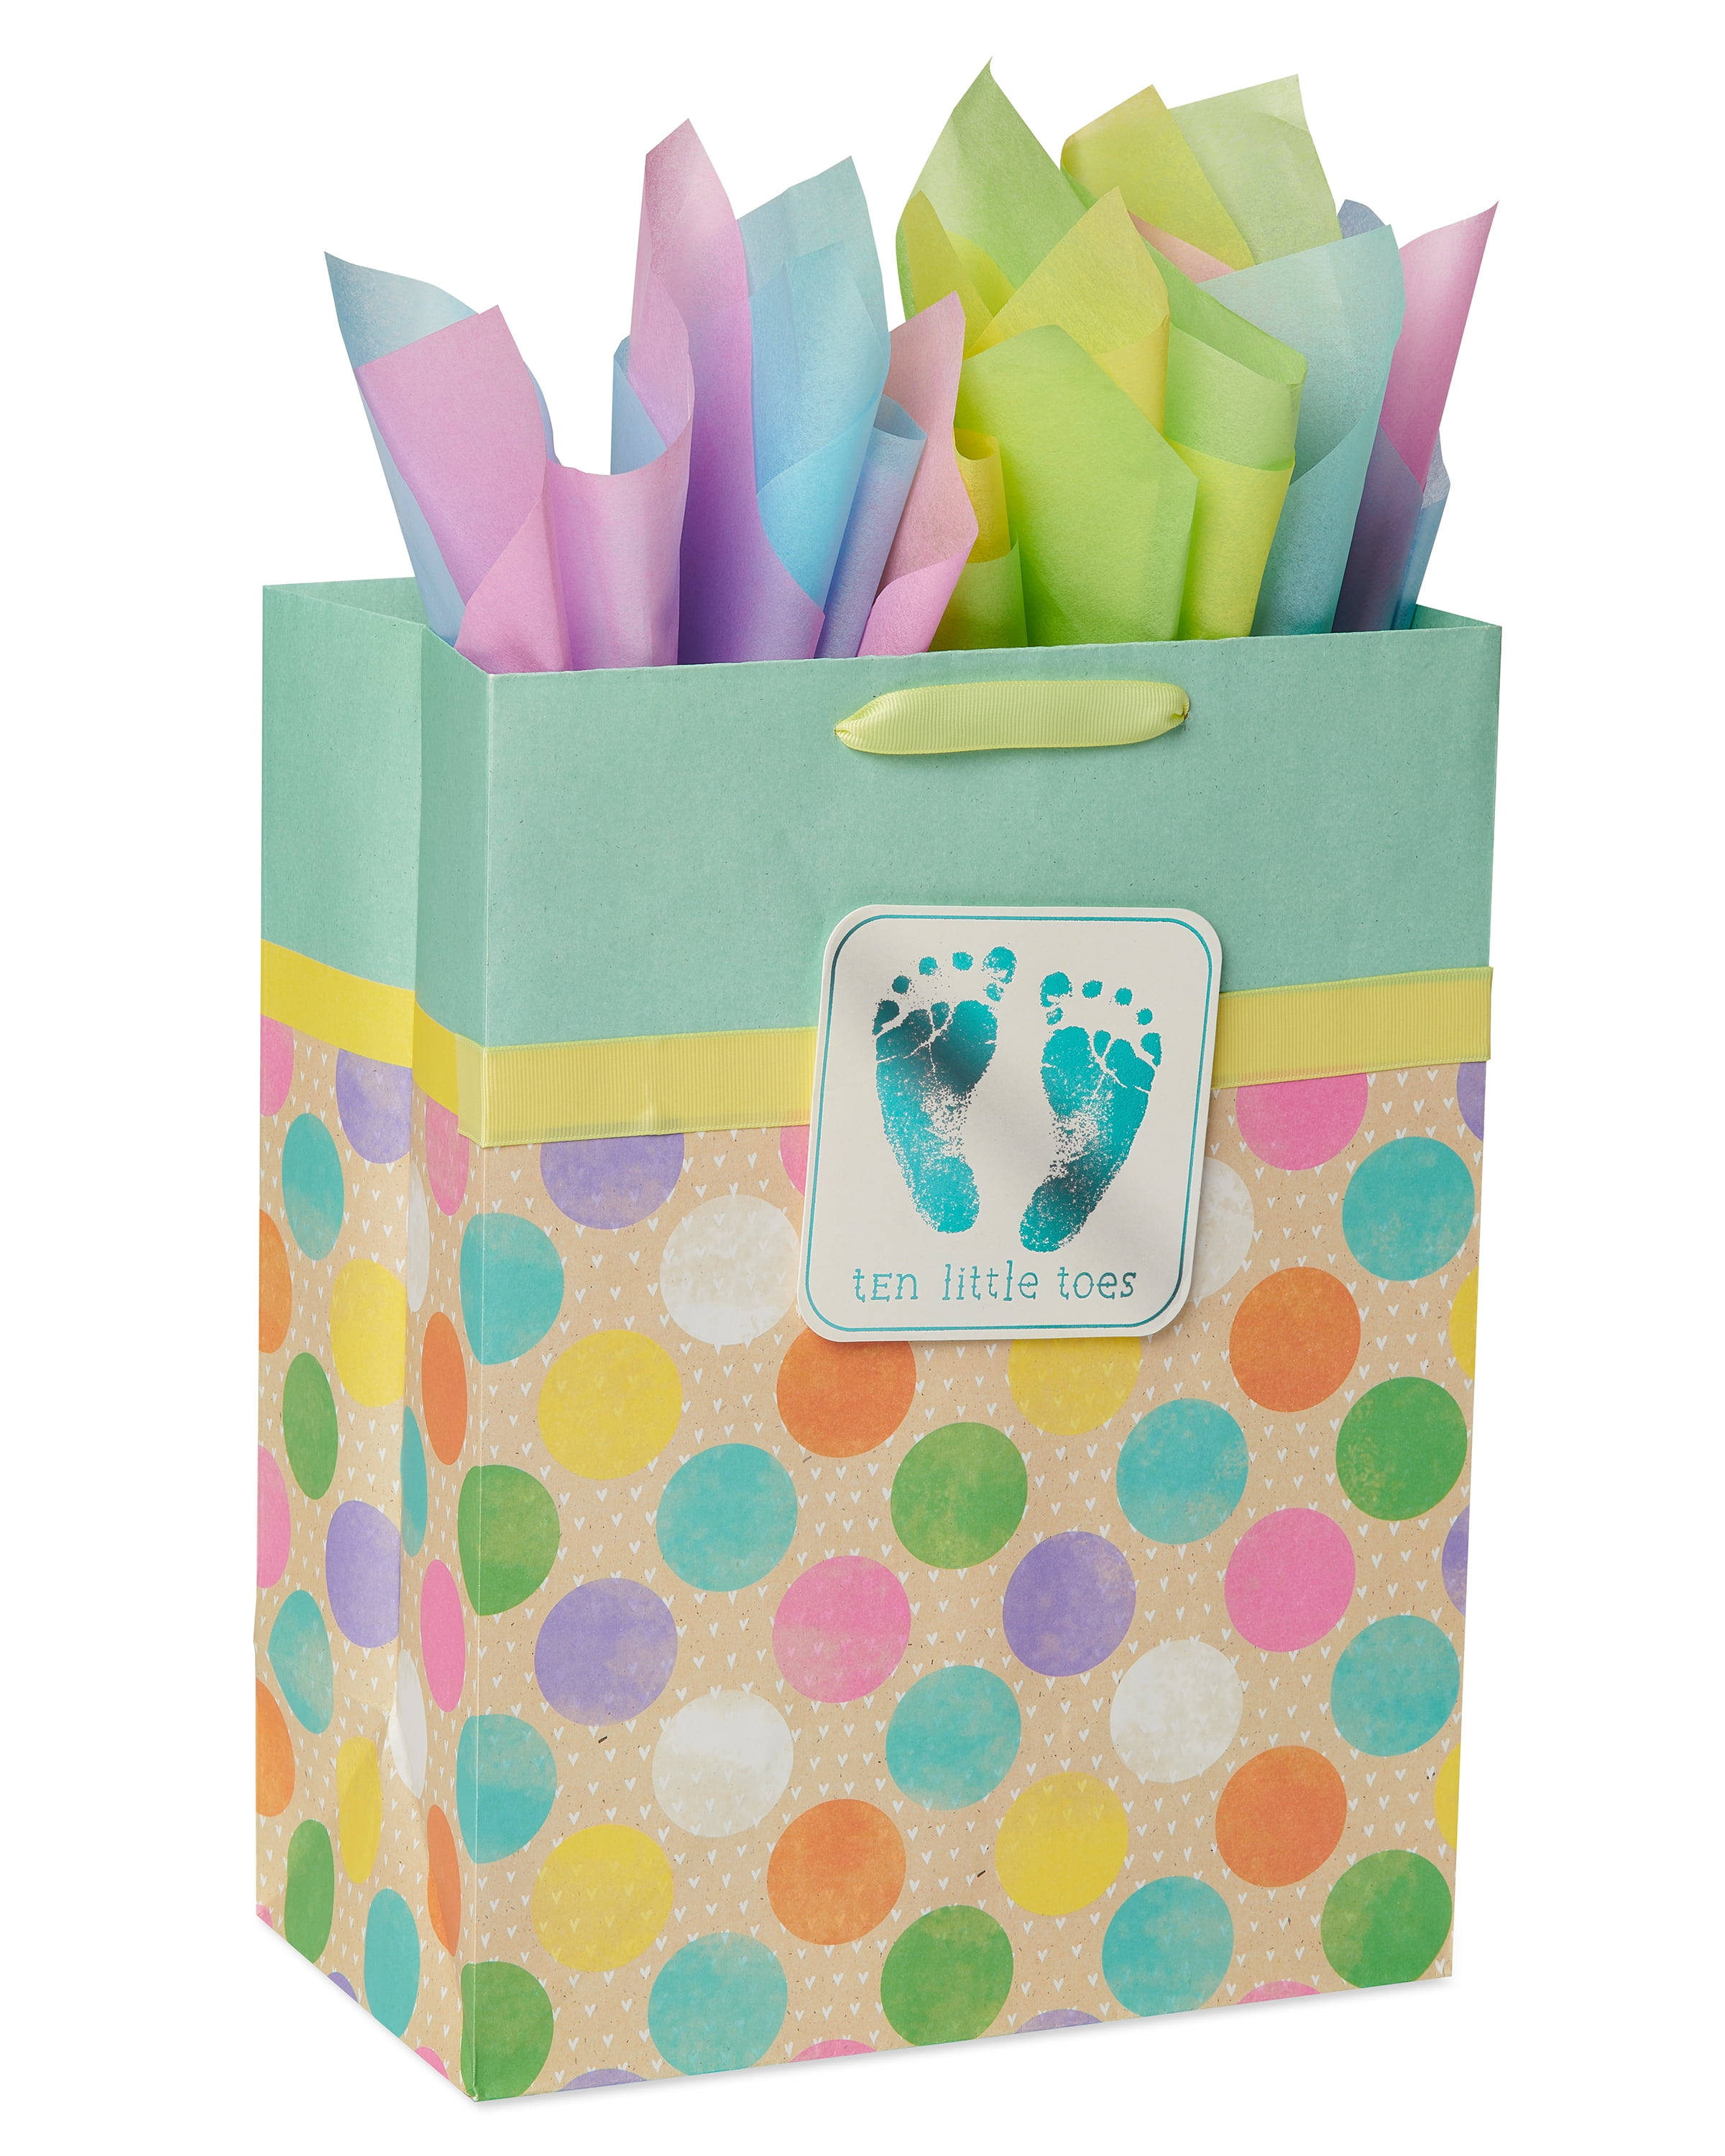 500 Teal Chevron Merchandise Retail Paper Party Favor Gift Bags 6" x 9" Tall